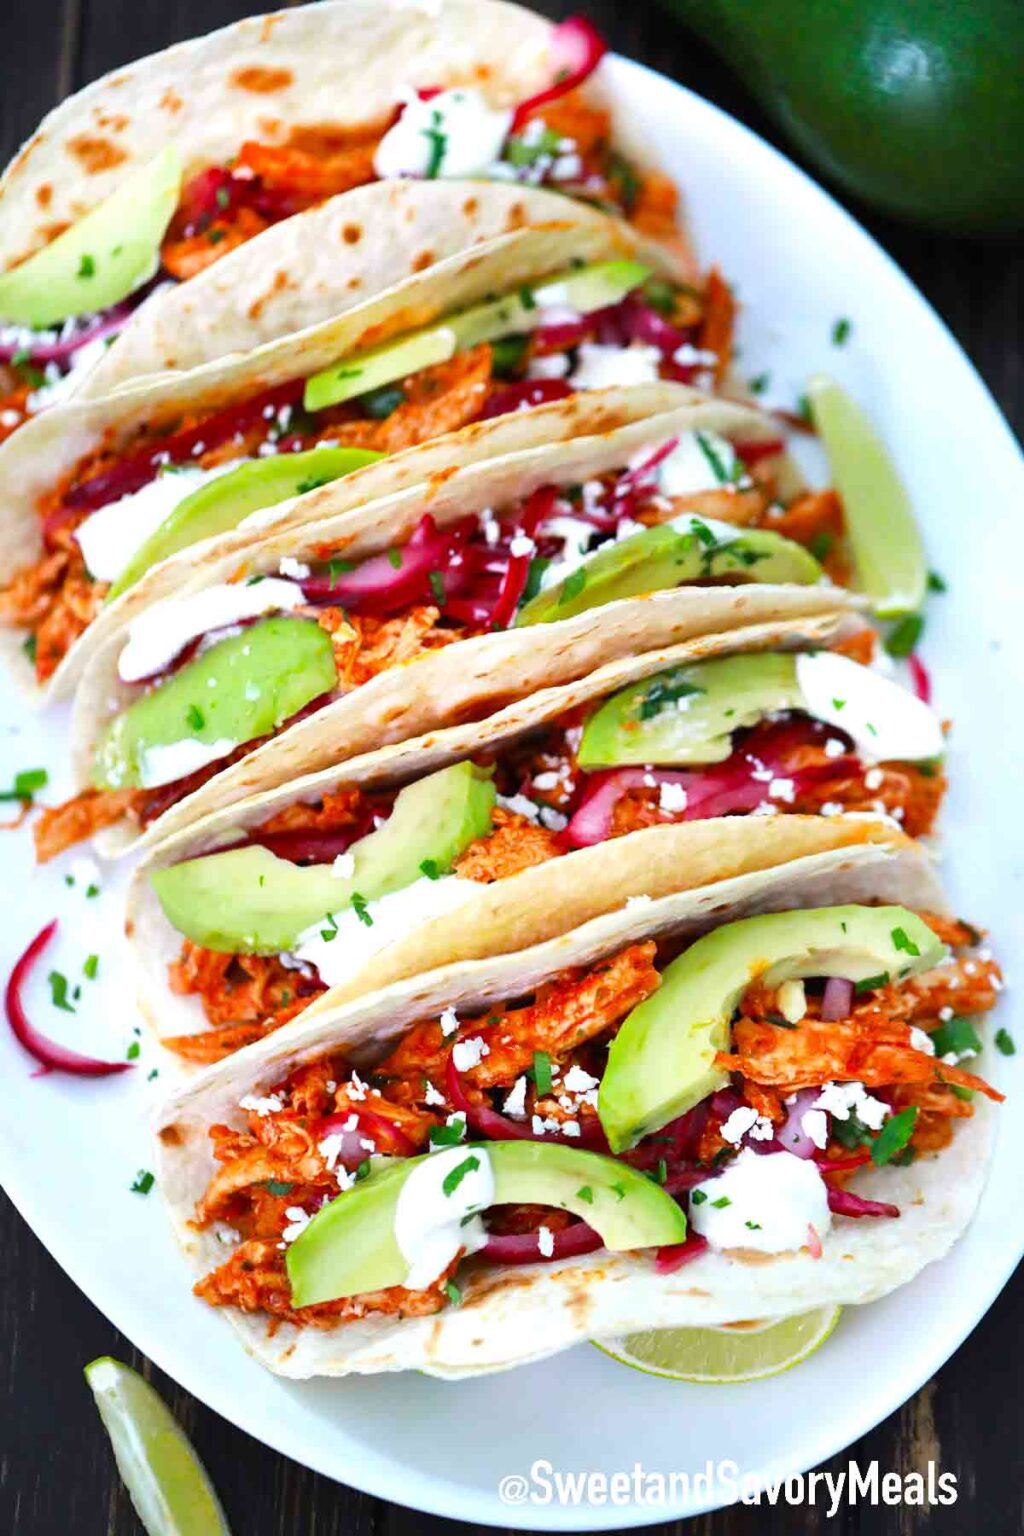 Chicken Tinga Tacos Recipe [Video] - Sweet and Savory Meals